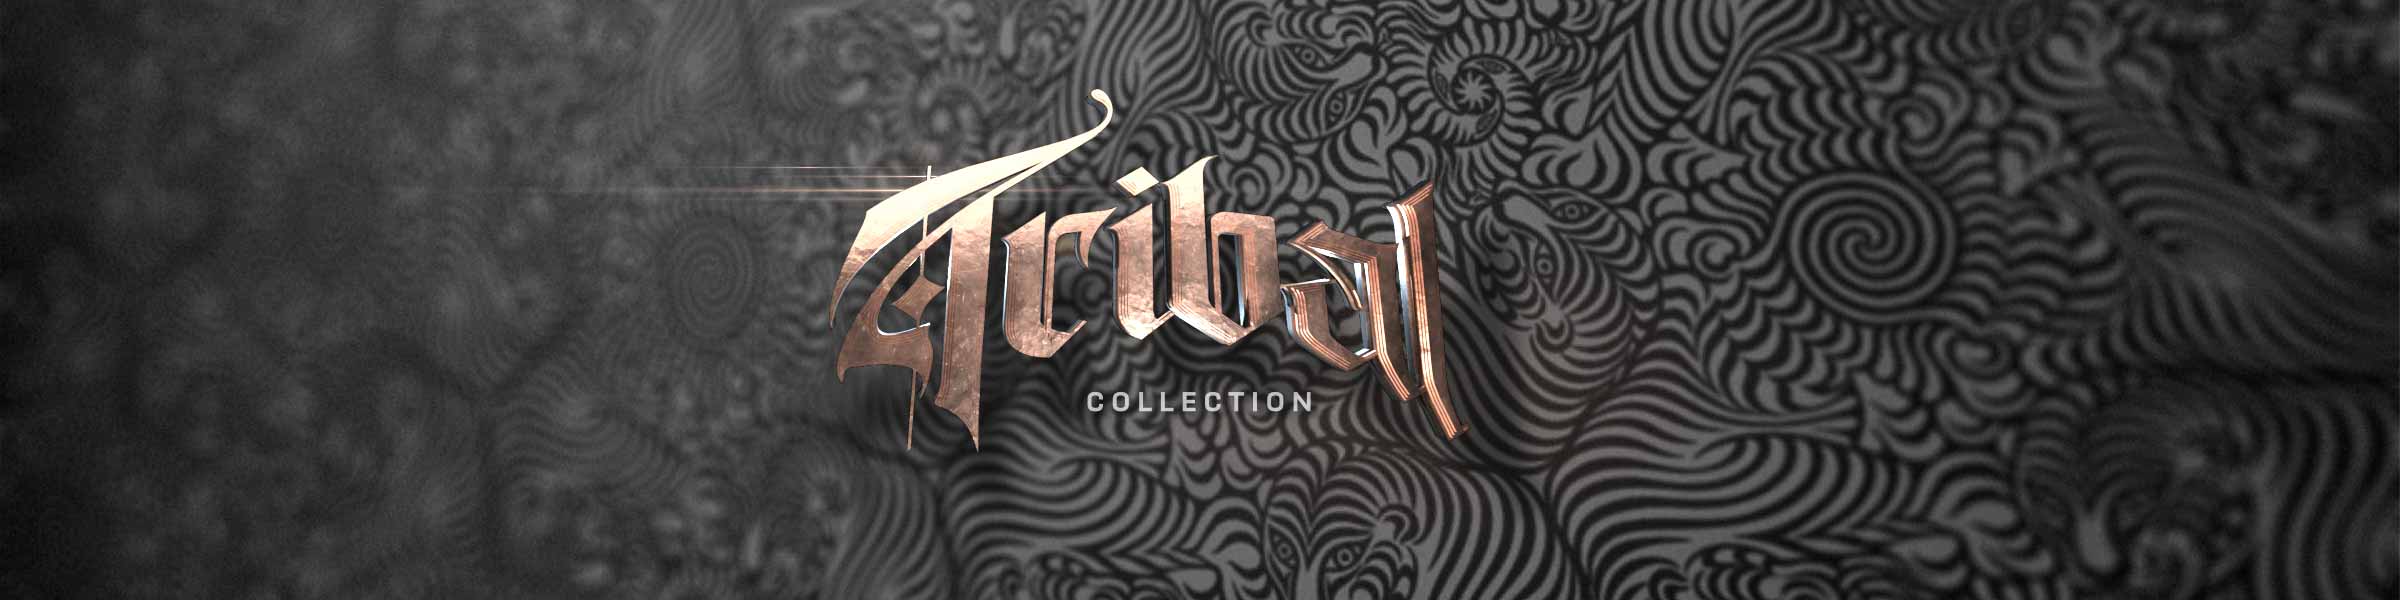 Tribal Copper Pin Collection Promotion